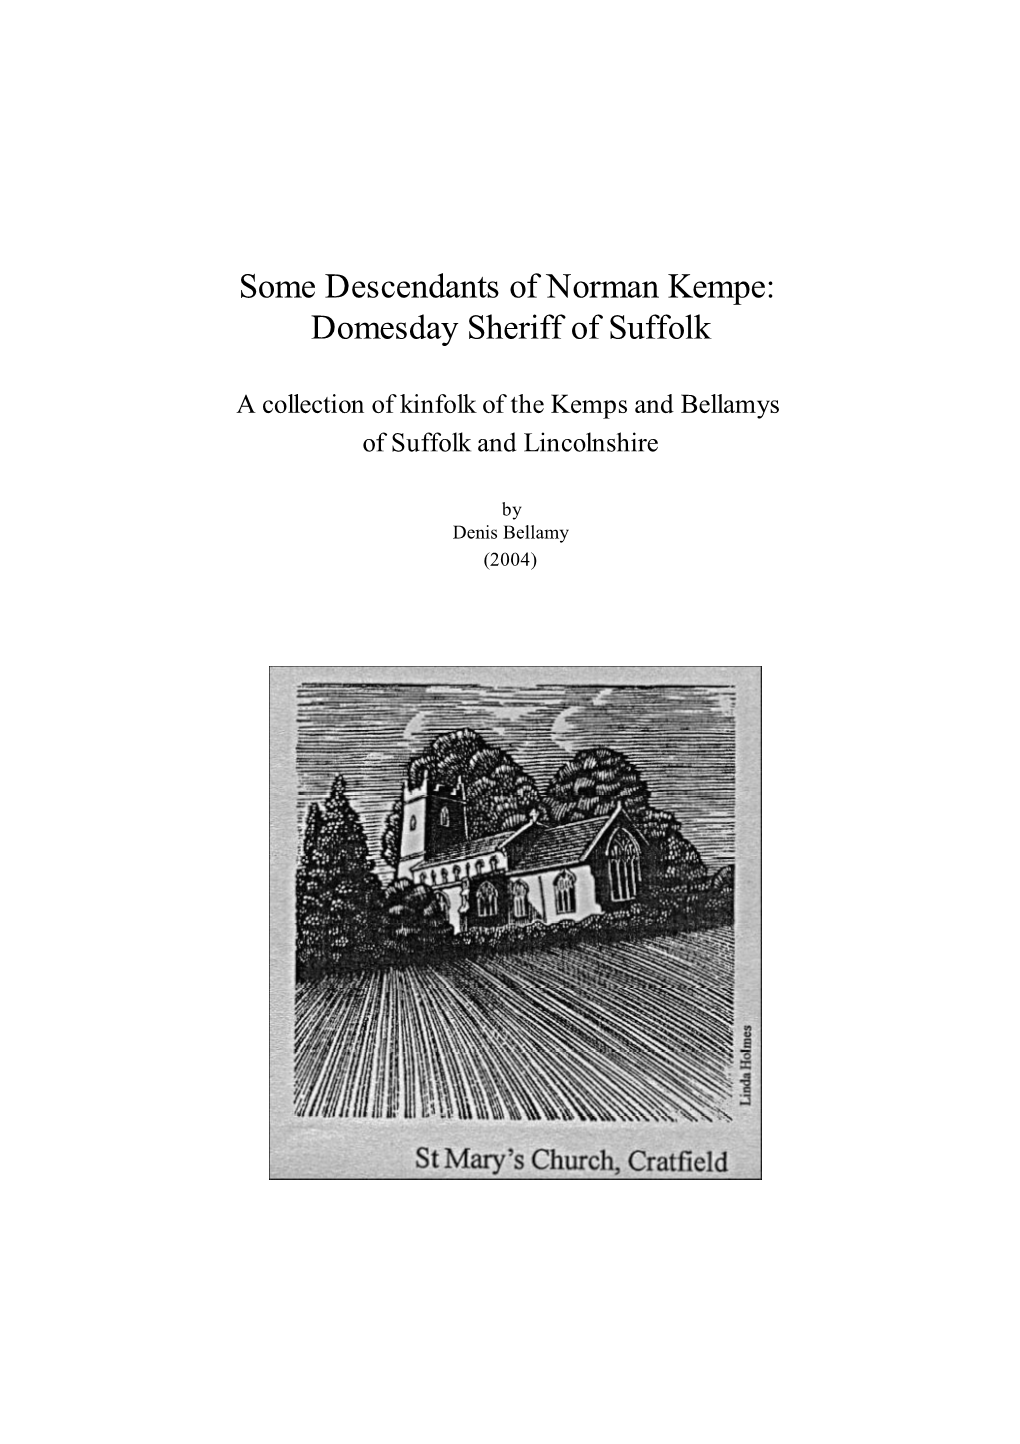 Some Descendants of Norman Kempe: Domesday Sheriff of Suffolk